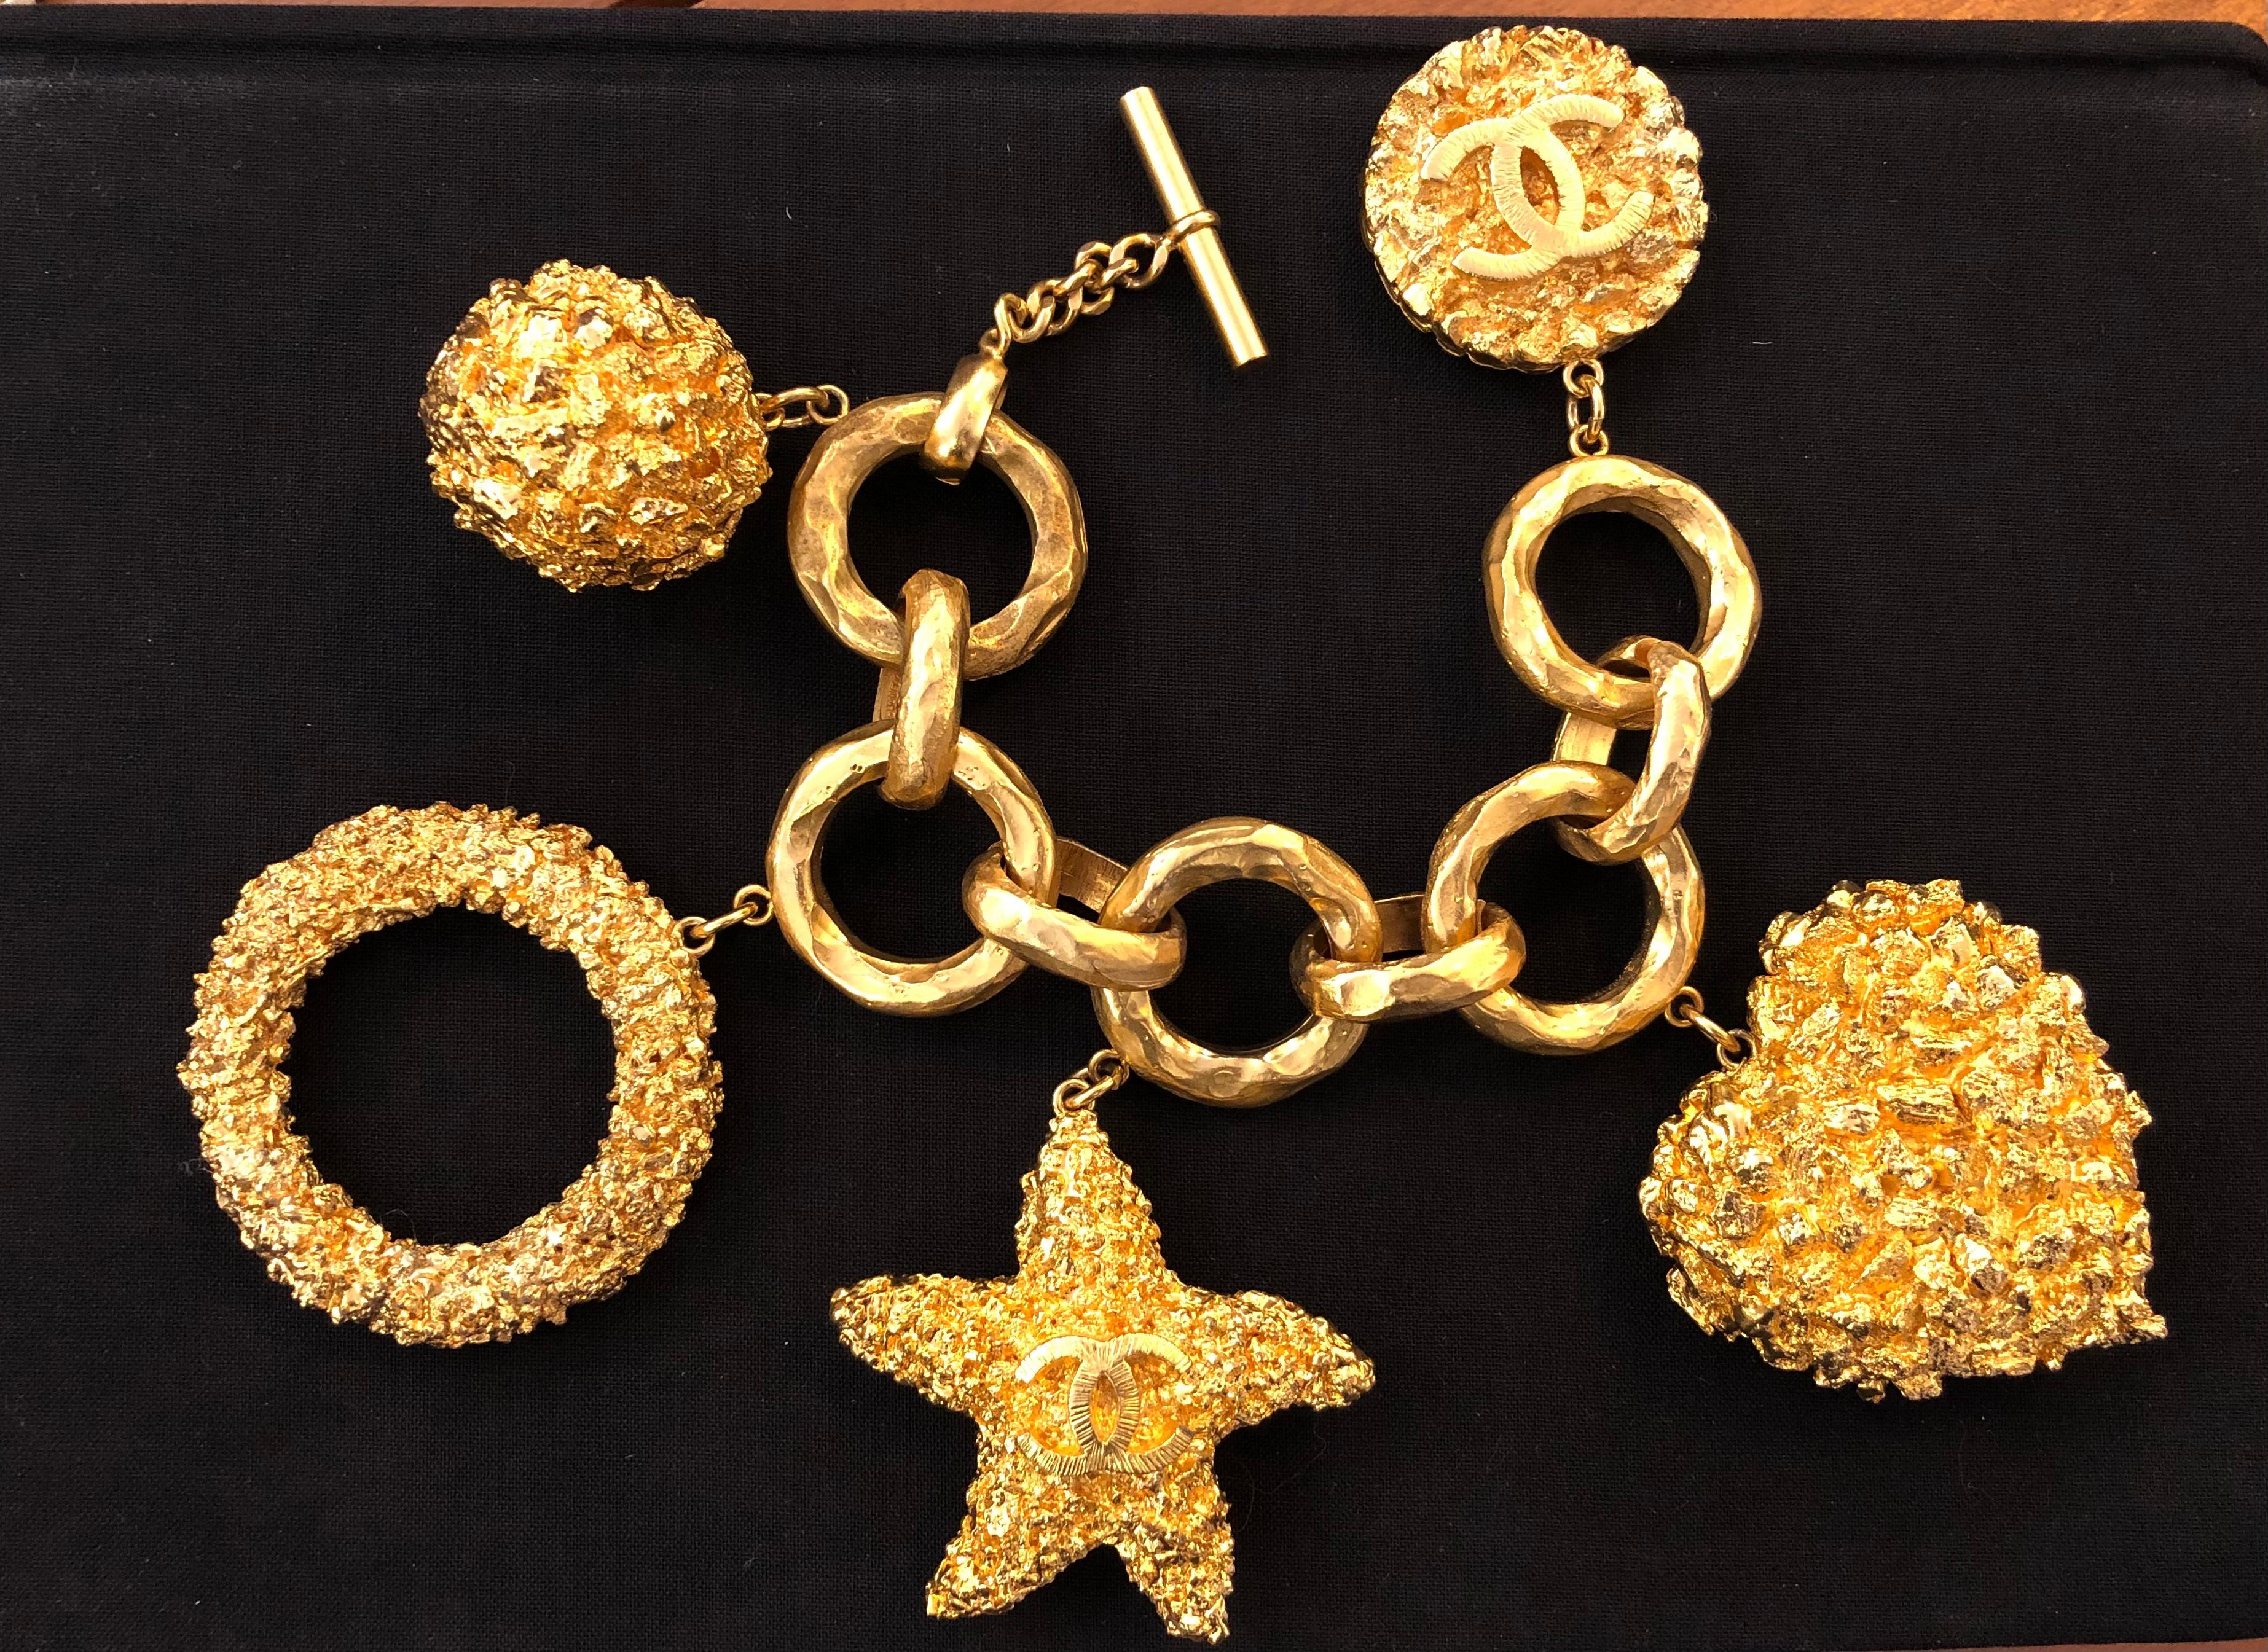 From Chanel 1993 Cruise collection, this huge gold toned bracelet features five gold toned textured motifs including a CC starfish. It was featured in 1993 Cruise collection Ad campaign. An absolutely rare piece to add to your vintage Chanel